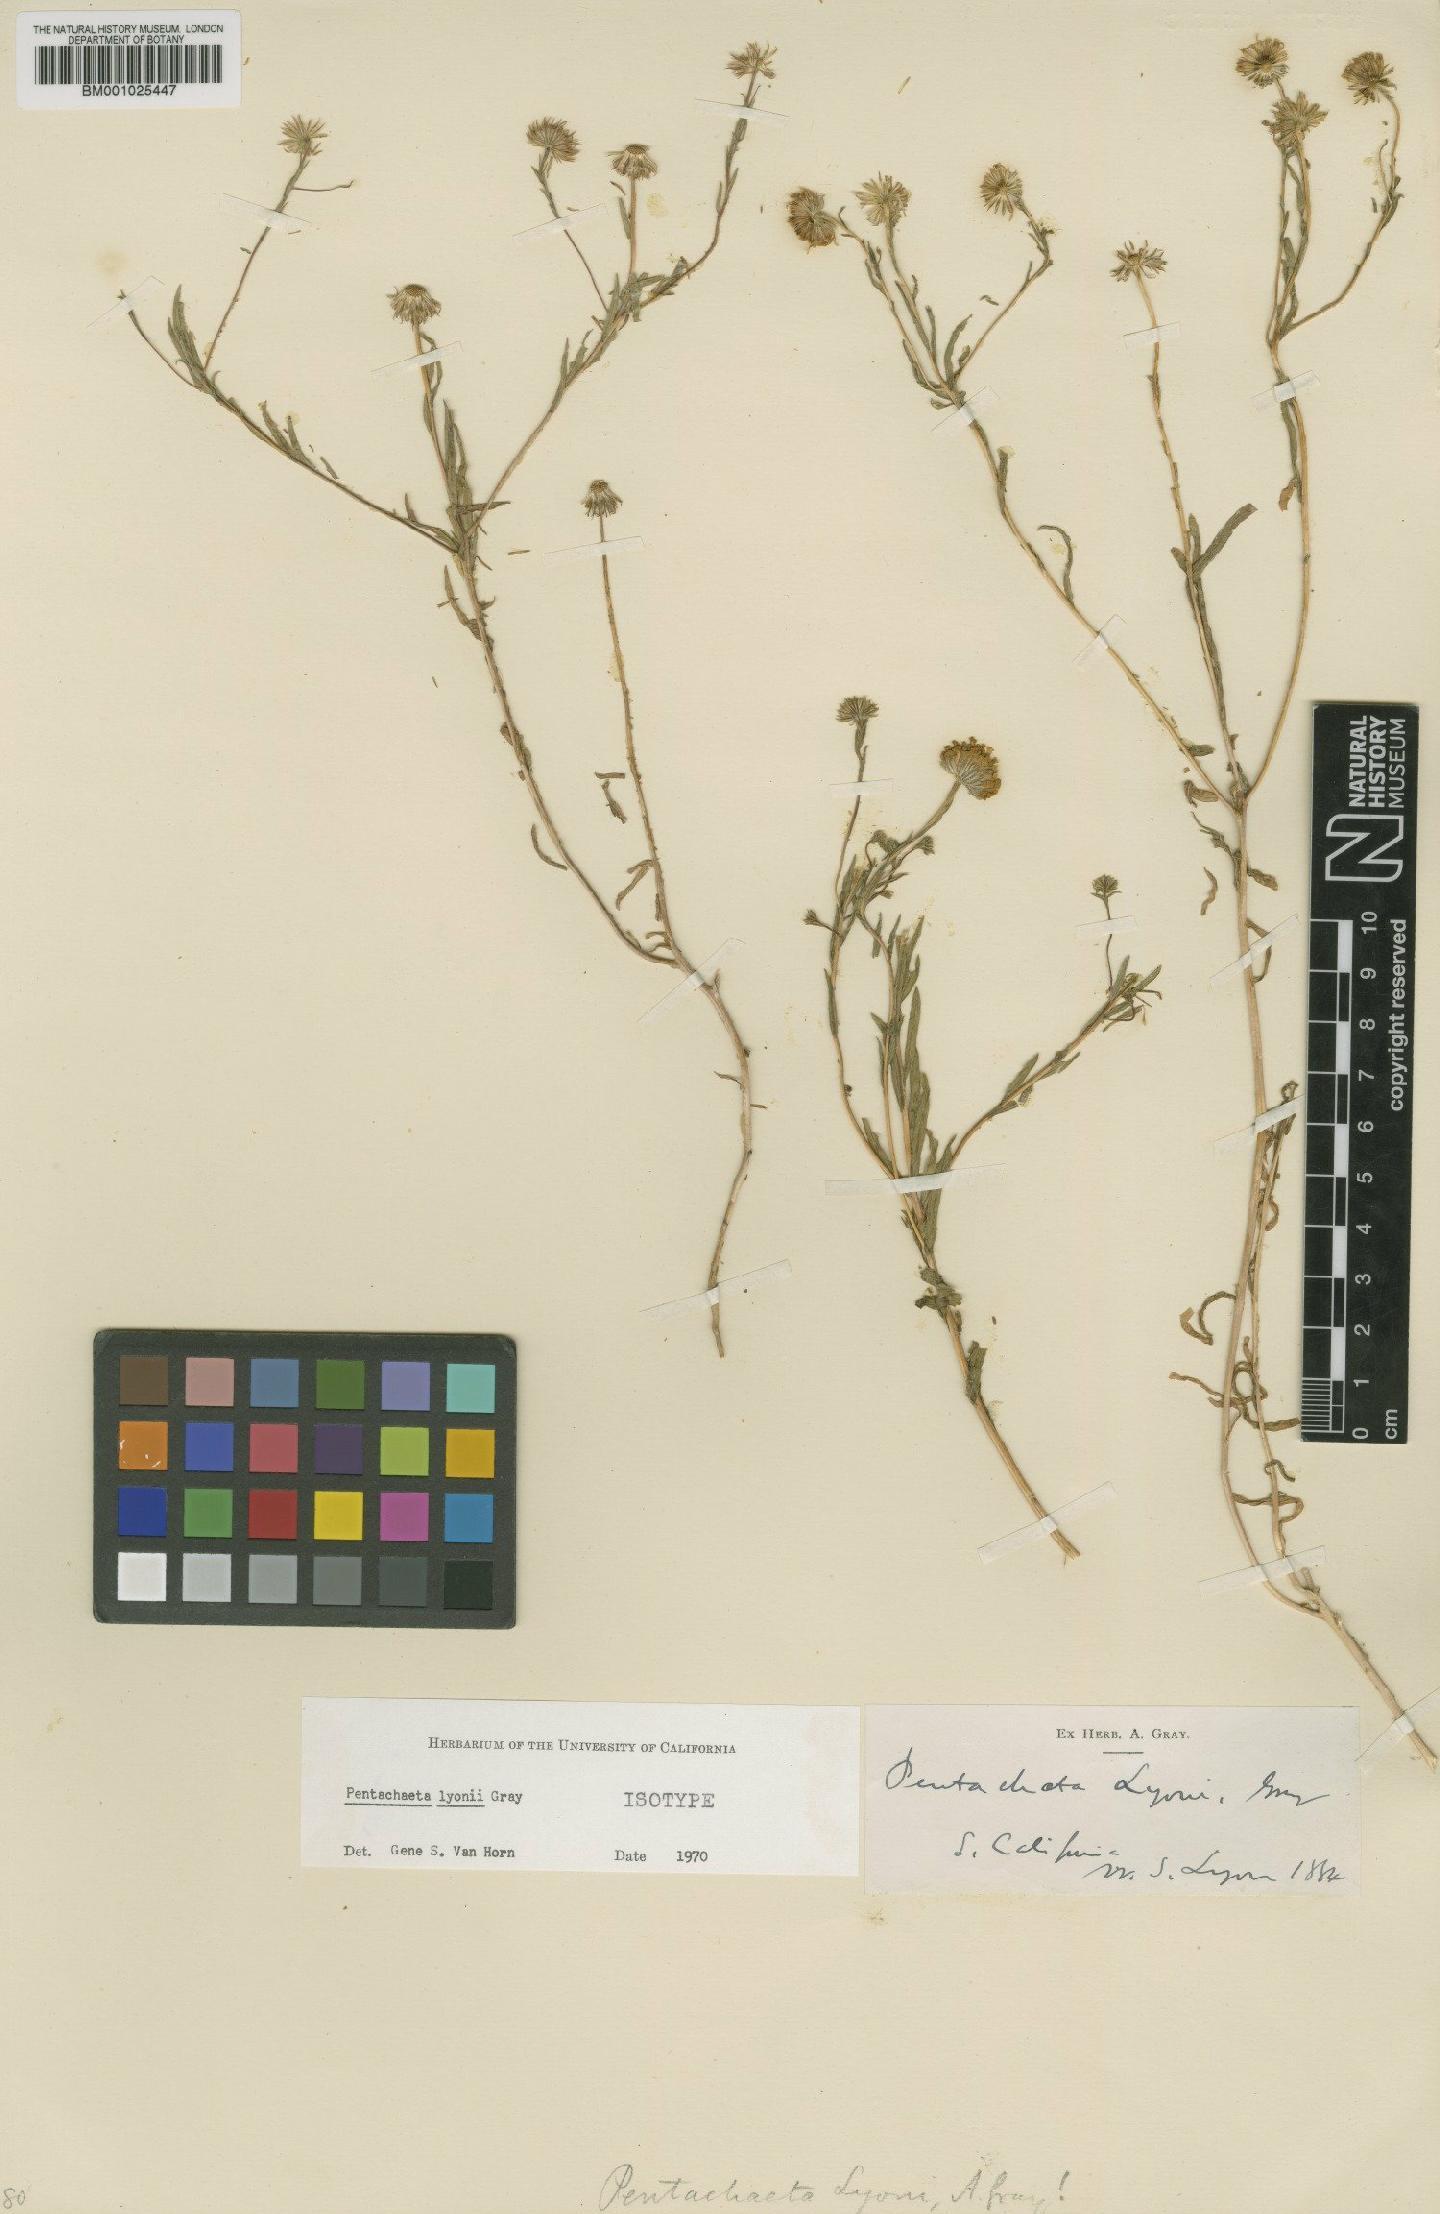 To NHMUK collection (Chaetopappa lyonii (A.Gray) D.D. Keck; Isotype; NHMUK:ecatalogue:749892)